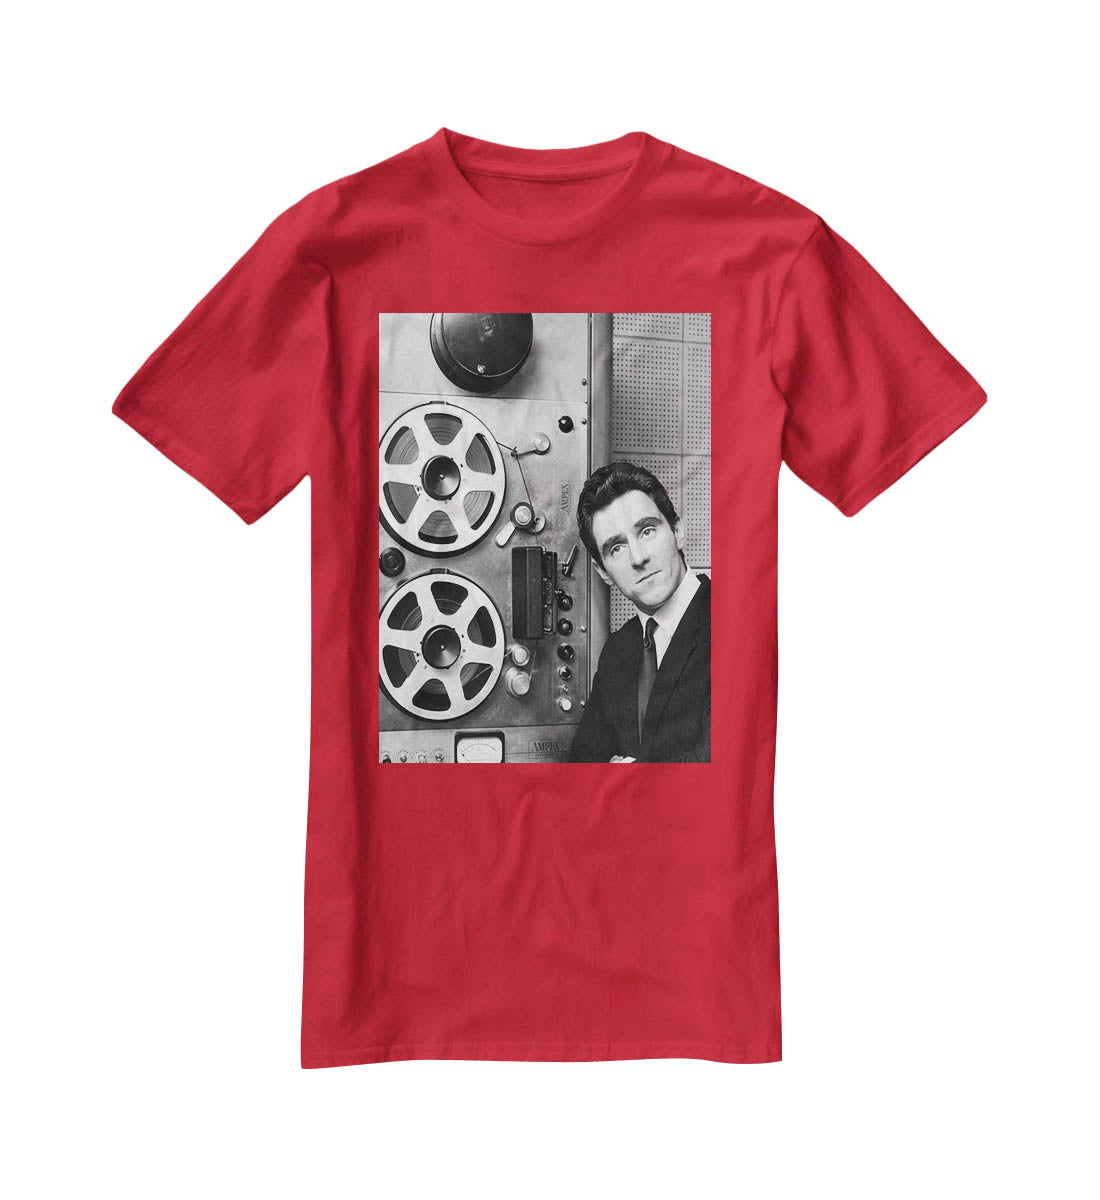 Anthony Newley in the recording studio T-Shirt - Canvas Art Rocks - 4